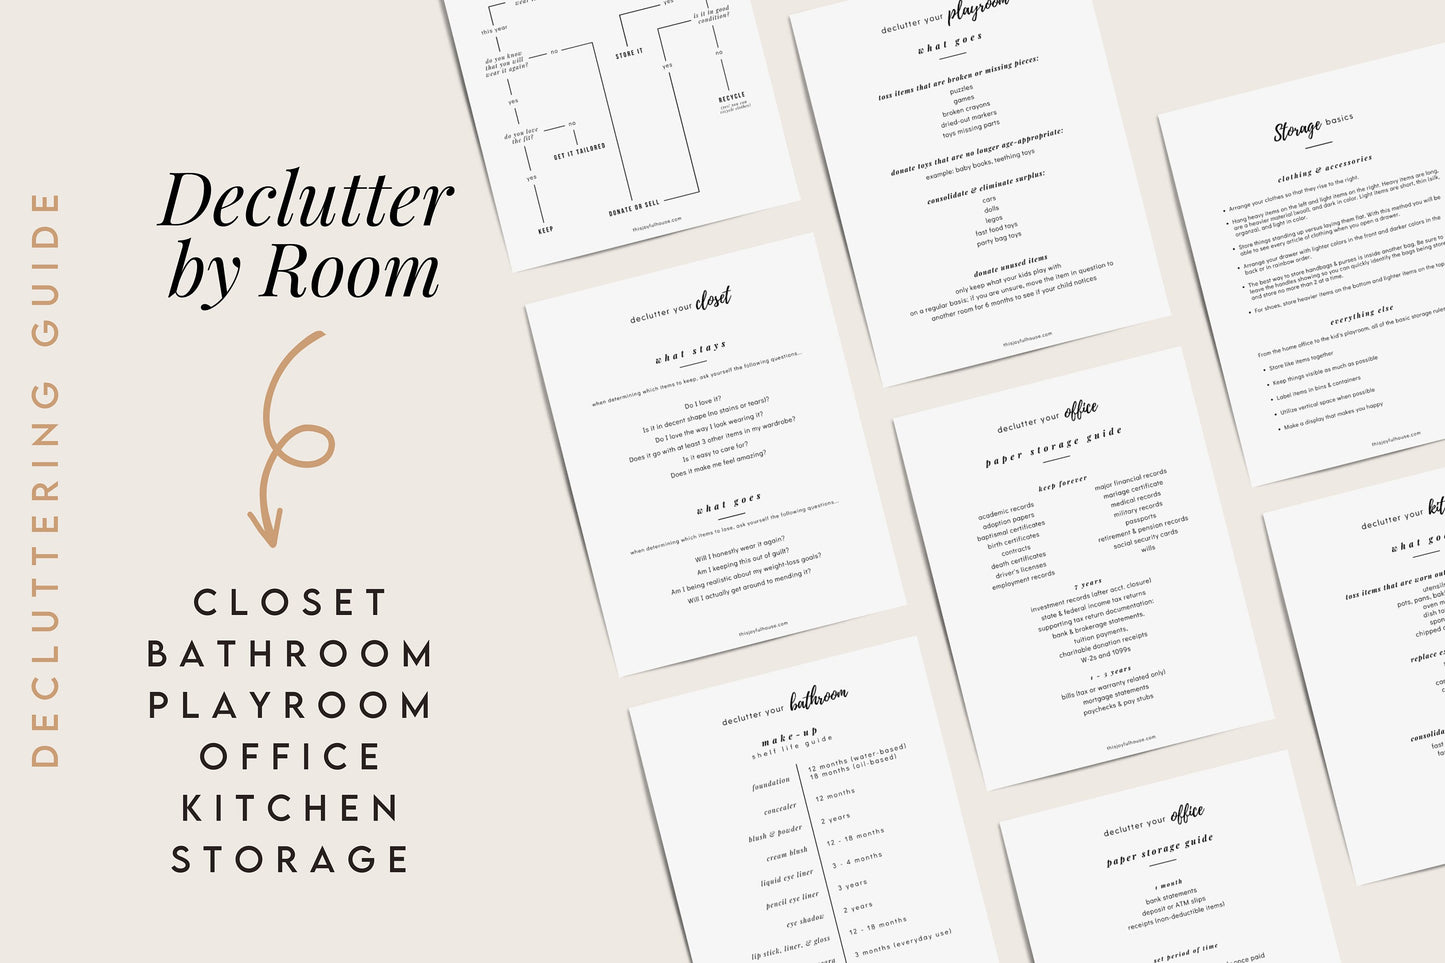 Home Organizing Bundle Printable | 3 Guides for One Great Price